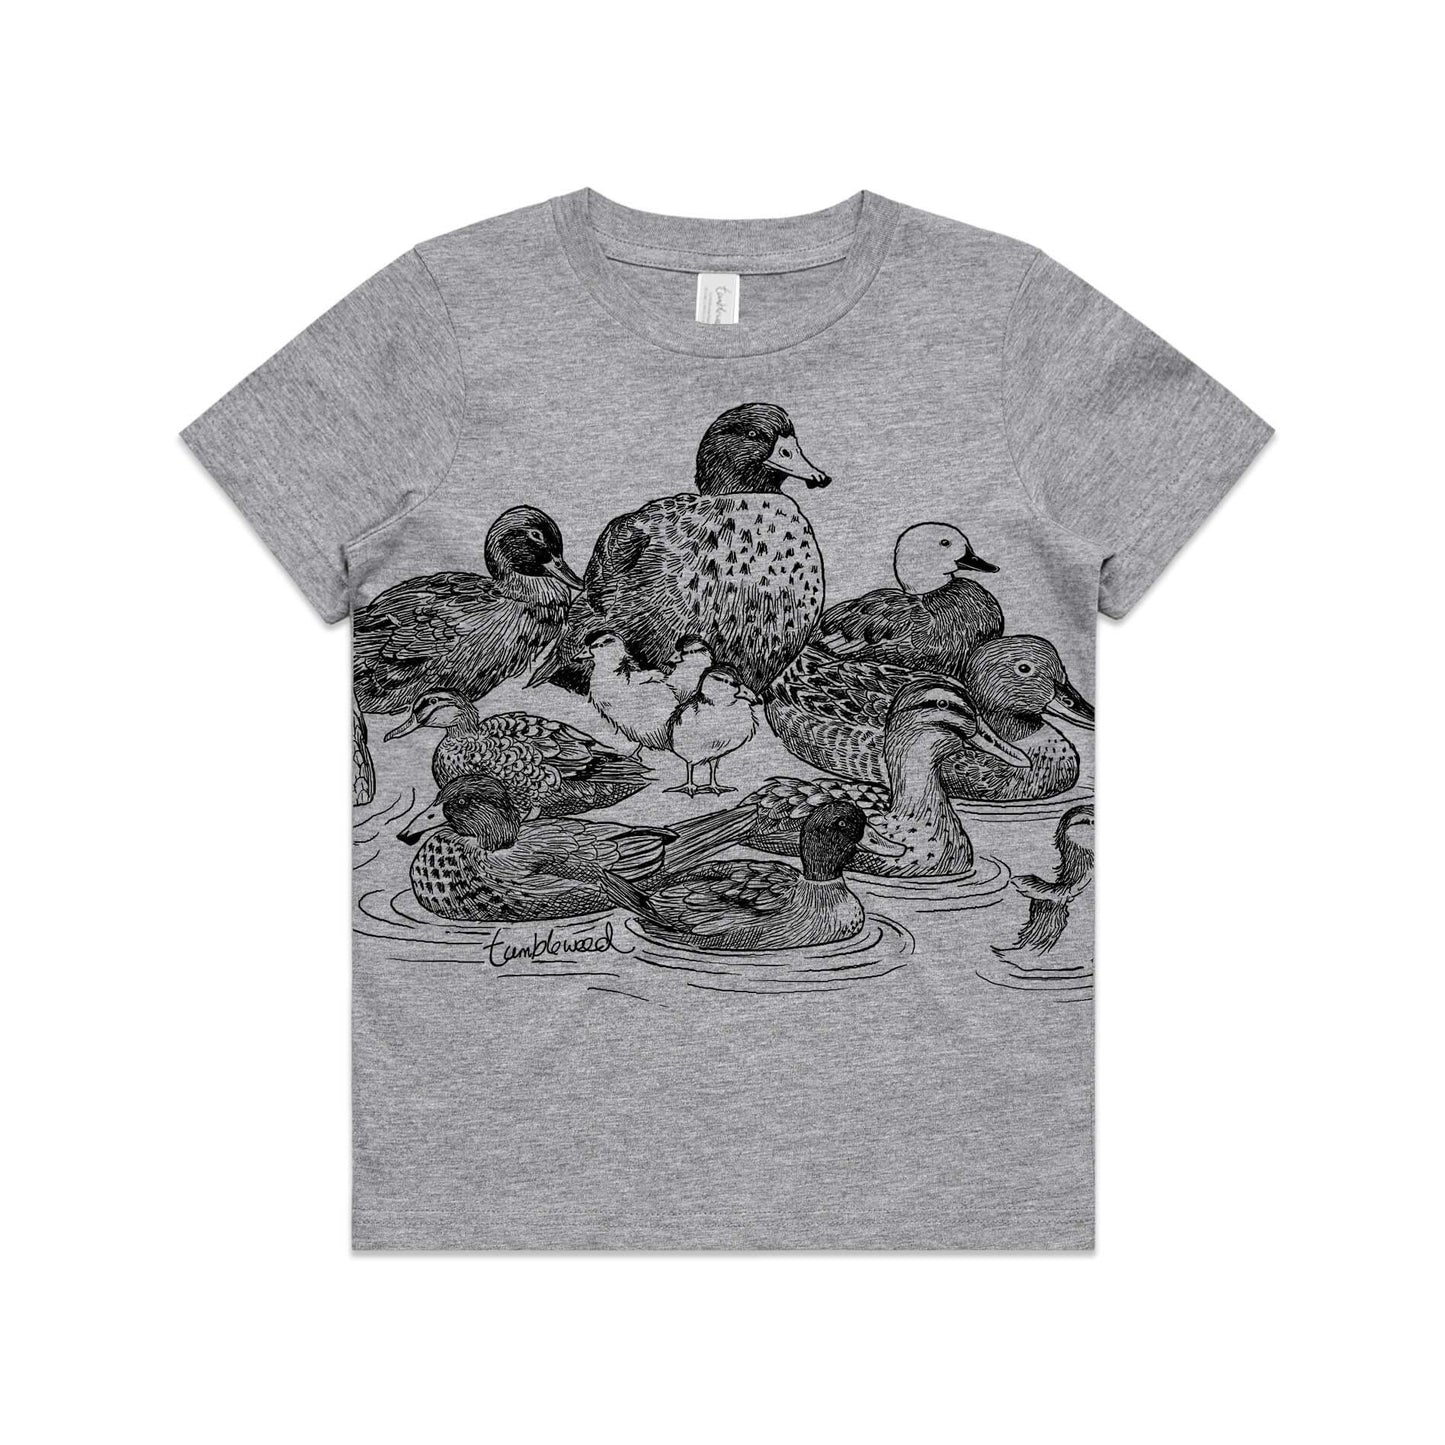 Grey marle, cotton kids' t-shirt with screen printed ducks  design.